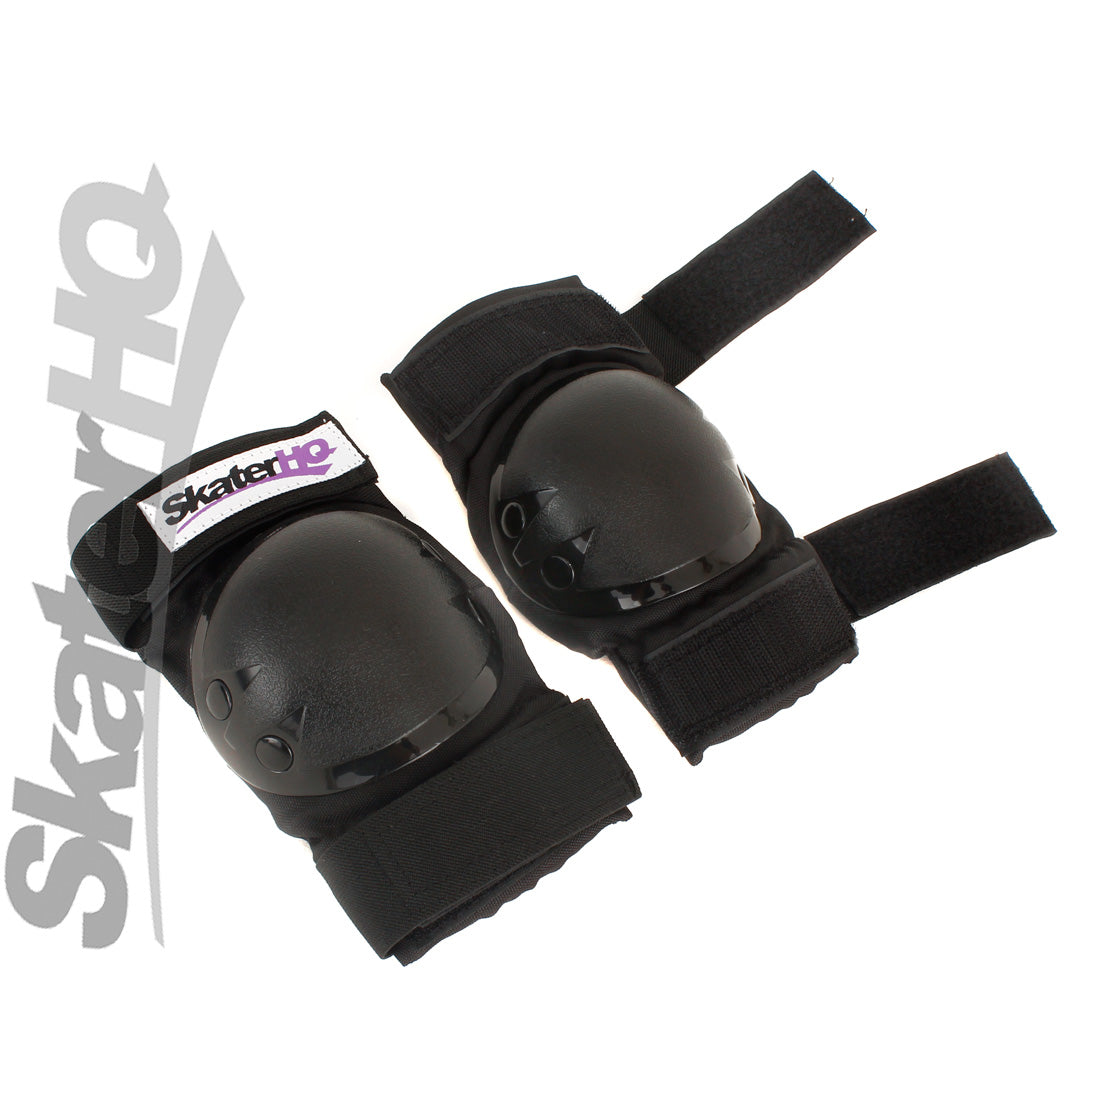 Skater HQ Elbow Pads - Medium Protective Gear